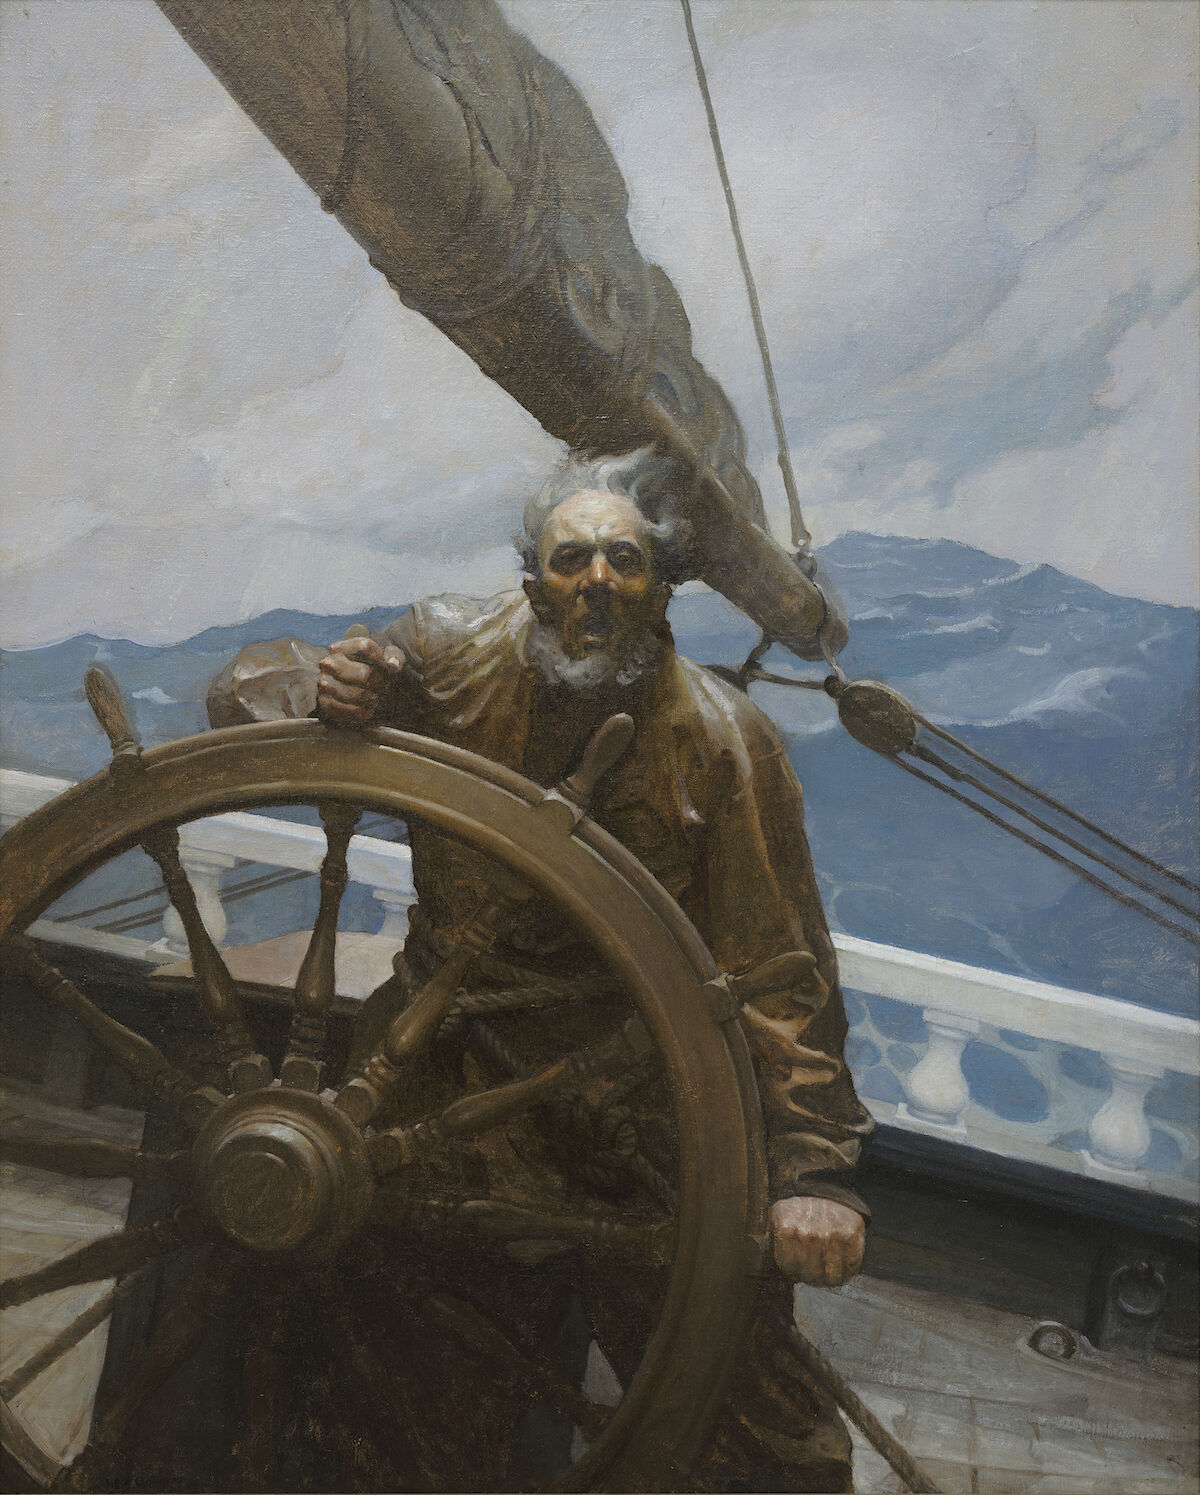 N. C. Wyeth, Yes, ‘N’, He’d Let a Roar Outer Him, An’ Mebbe He’d Sing, “Hail Columbia, Happy Land!,” 1914. Courtesy of the Brandywine River Museum of Art. 